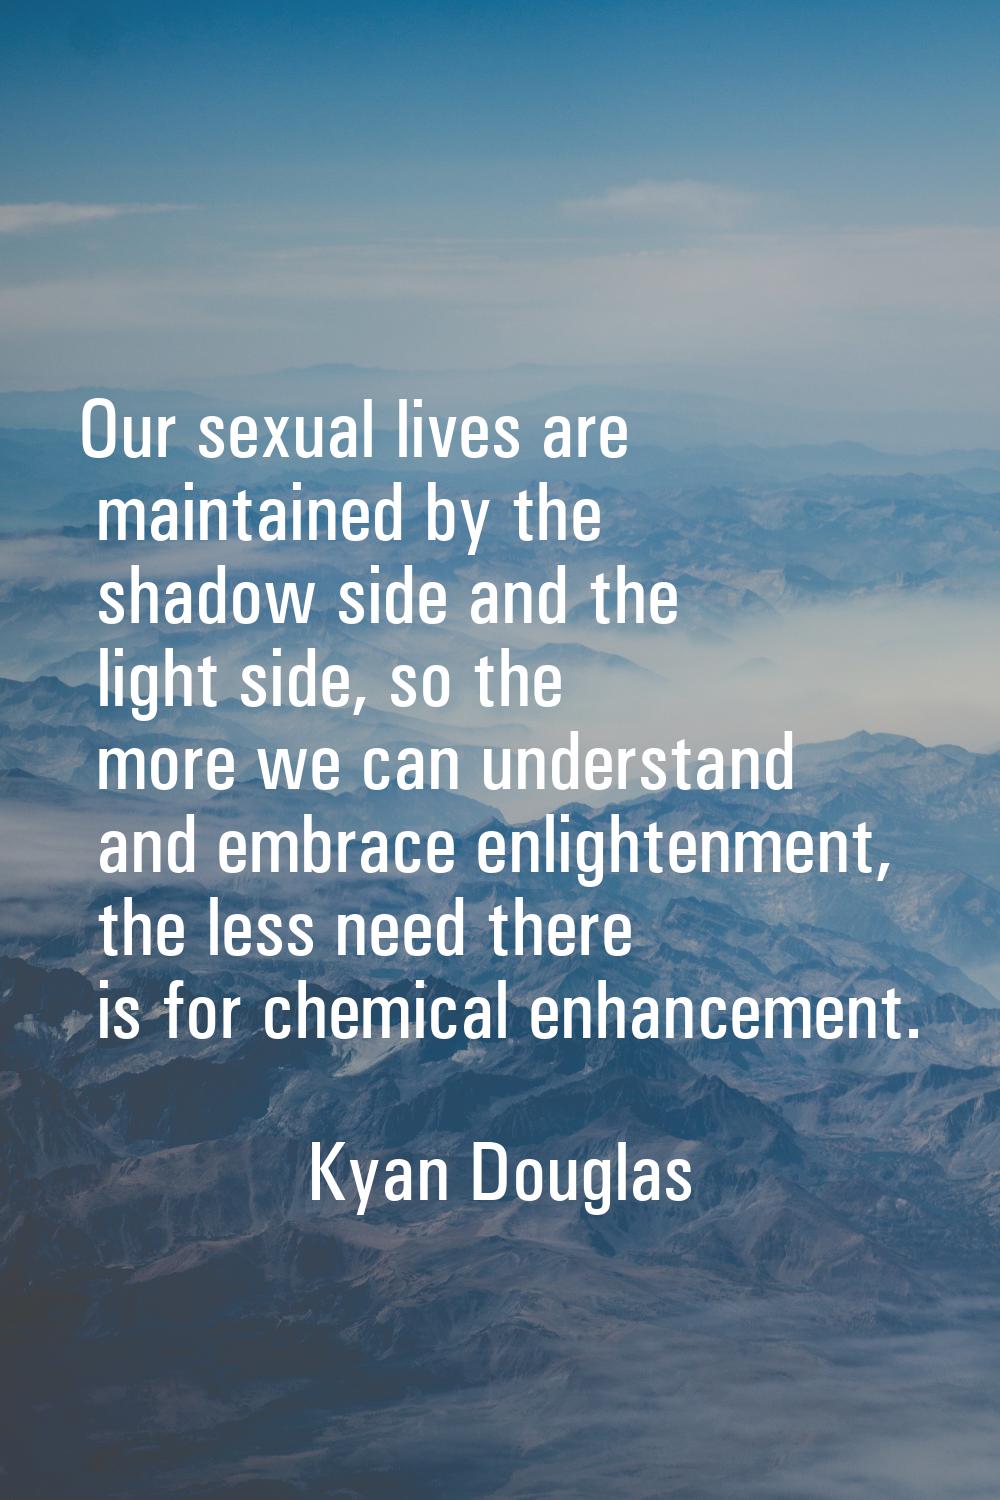 Our sexual lives are maintained by the shadow side and the light side, so the more we can understan